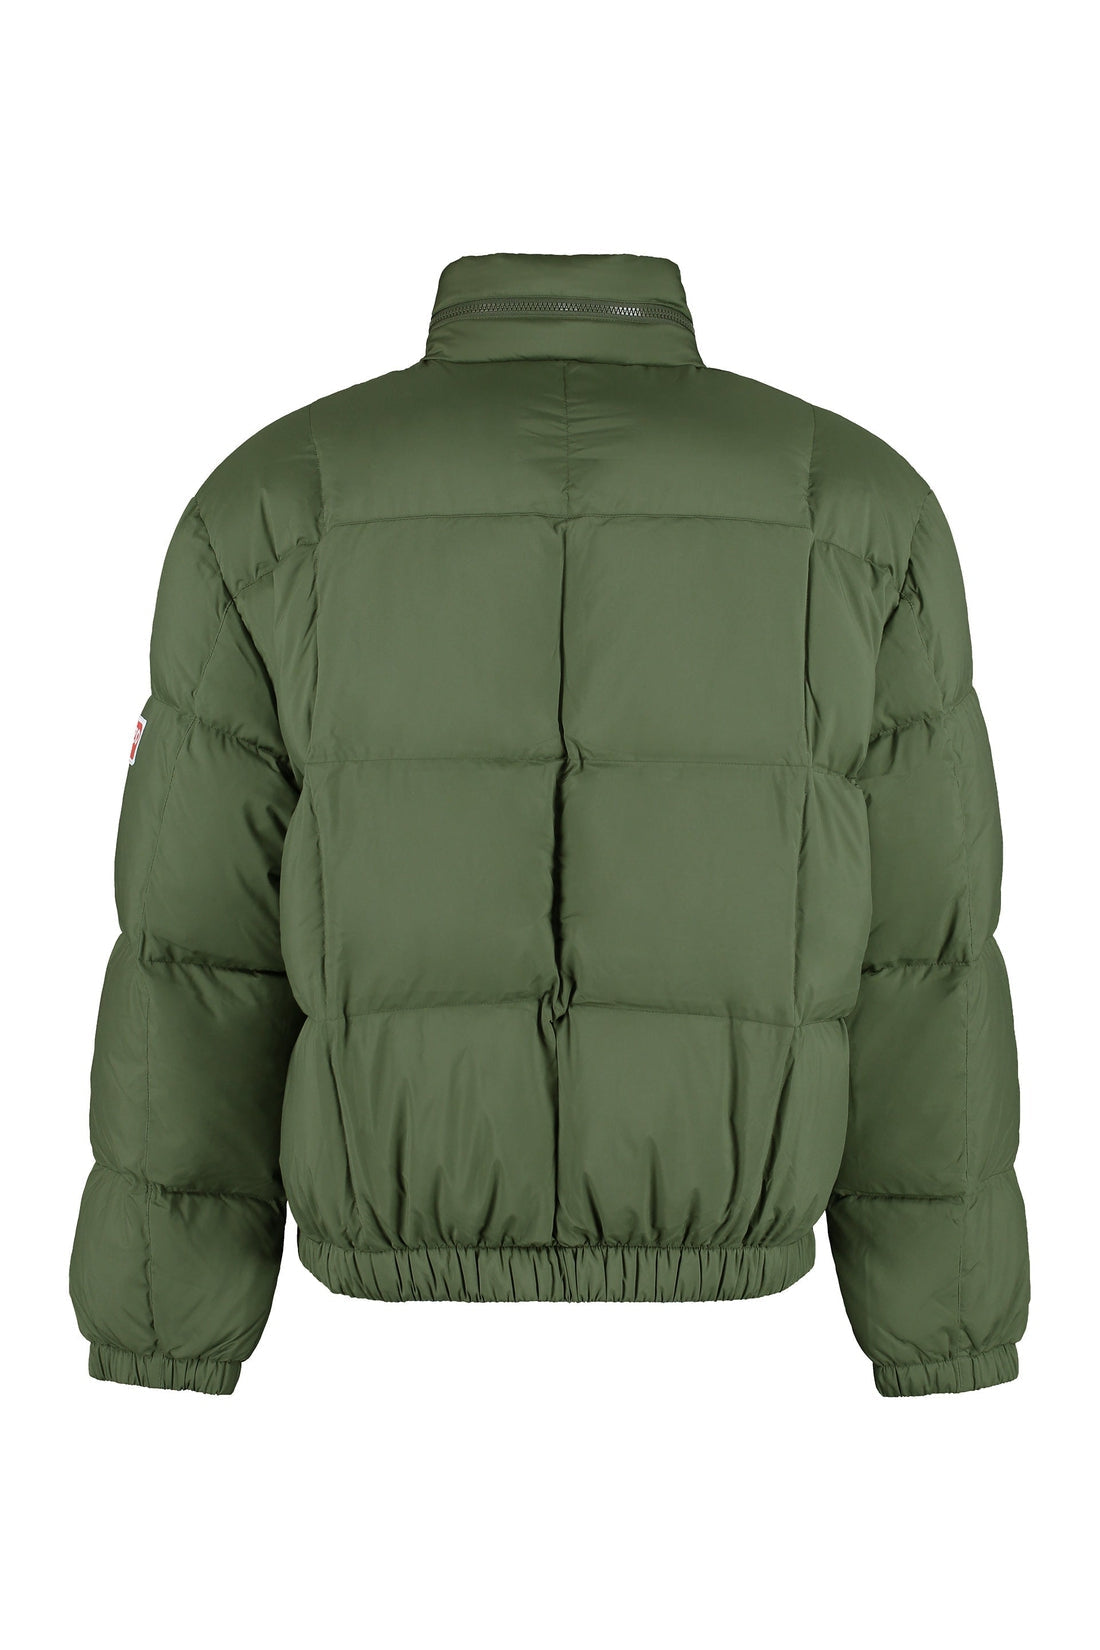 Kenzo-OUTLET-SALE-Zip and snap button fastening down jacket-ARCHIVIST